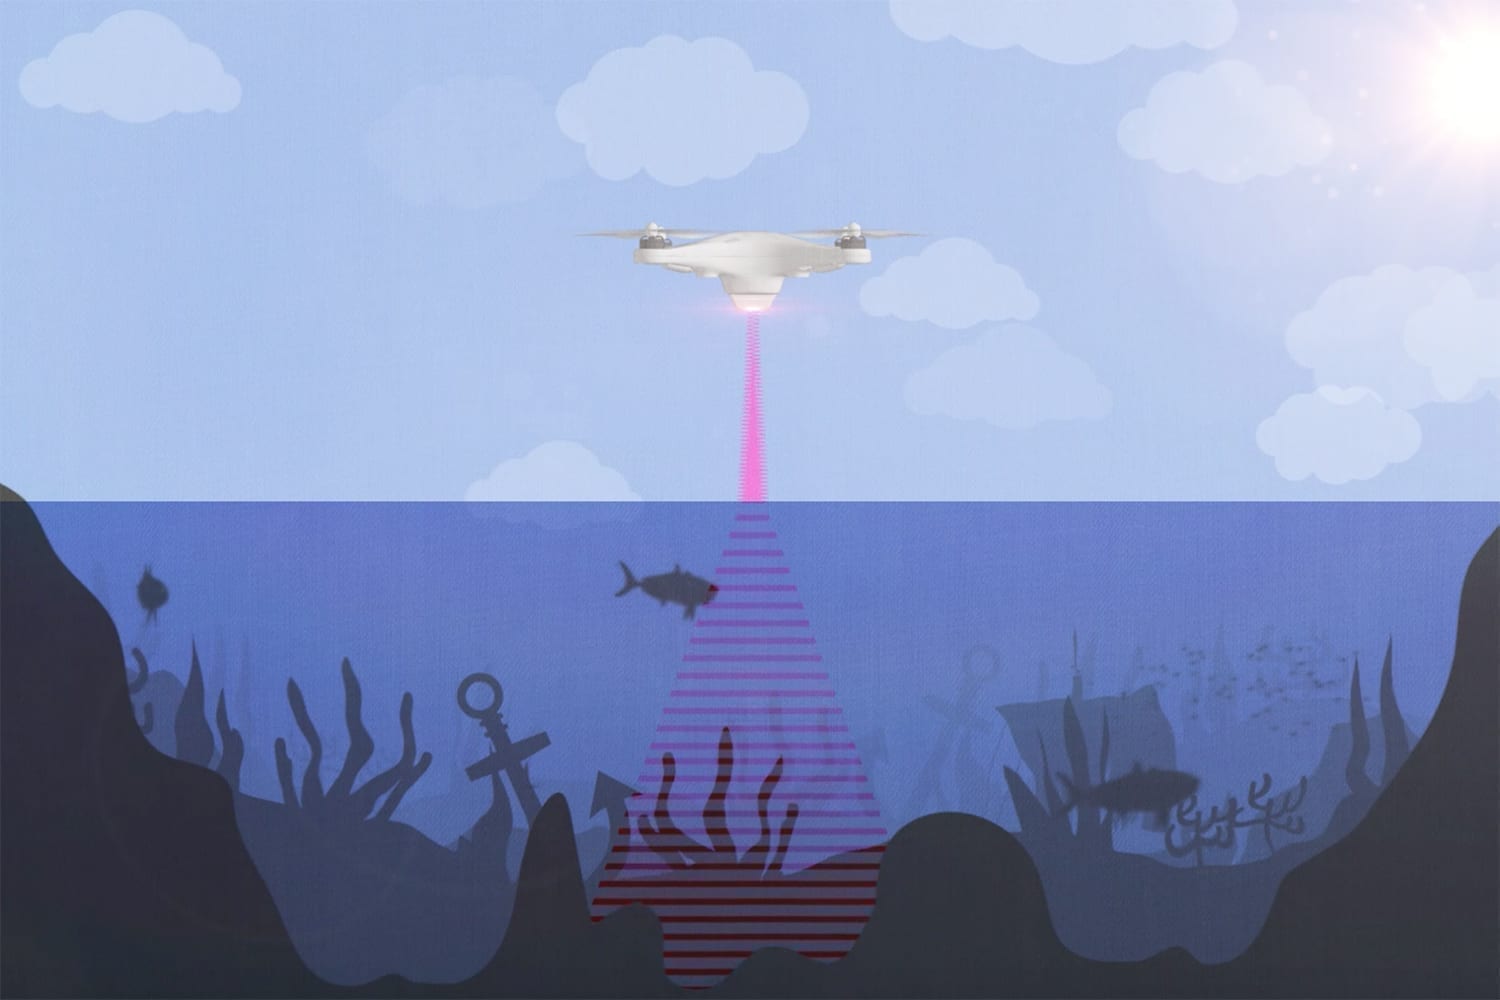 The Photoacoustic Airborne Sonar System combines light and sound to see underwater